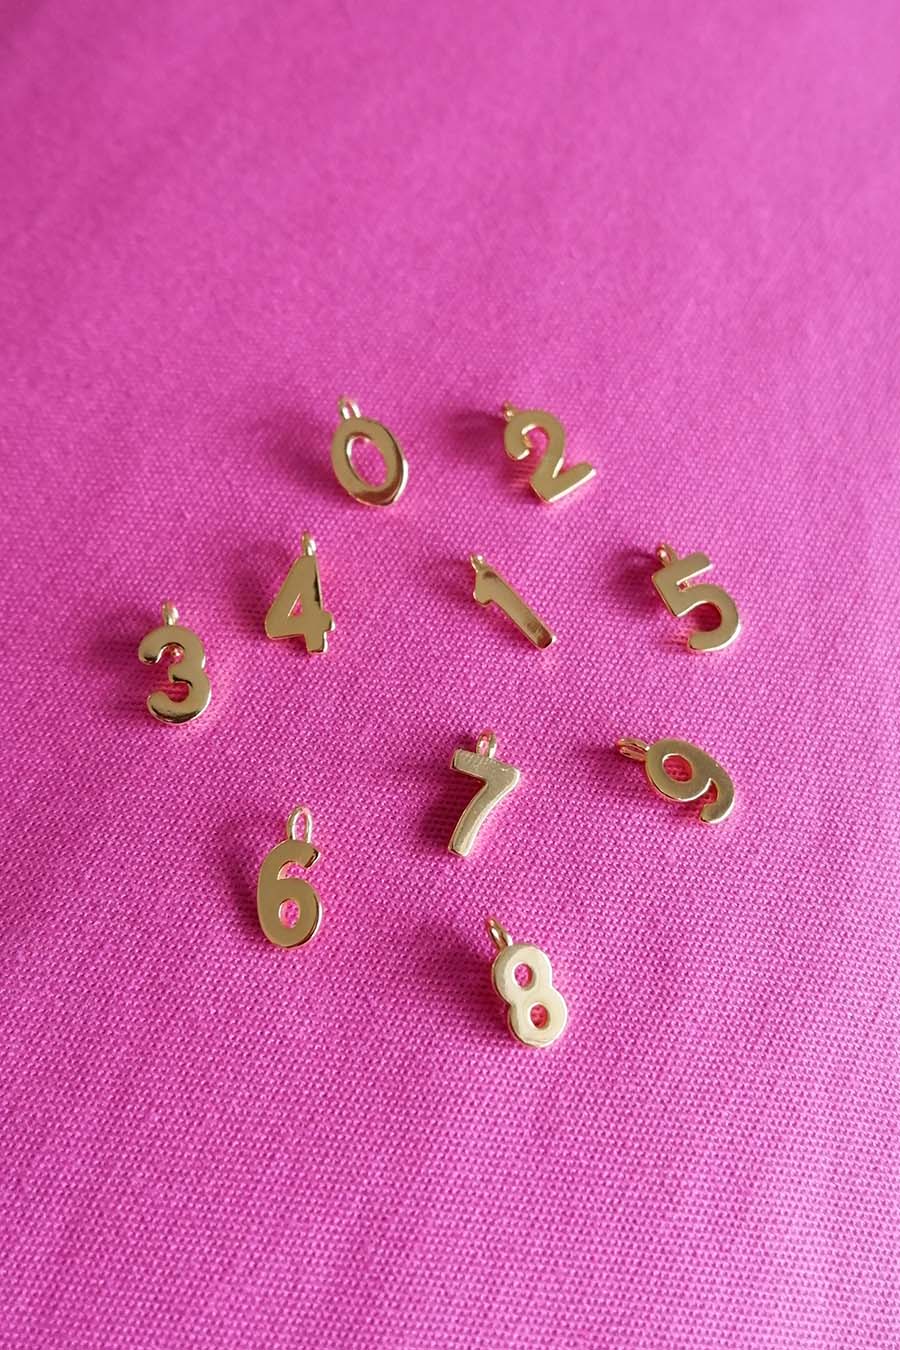 Number charms